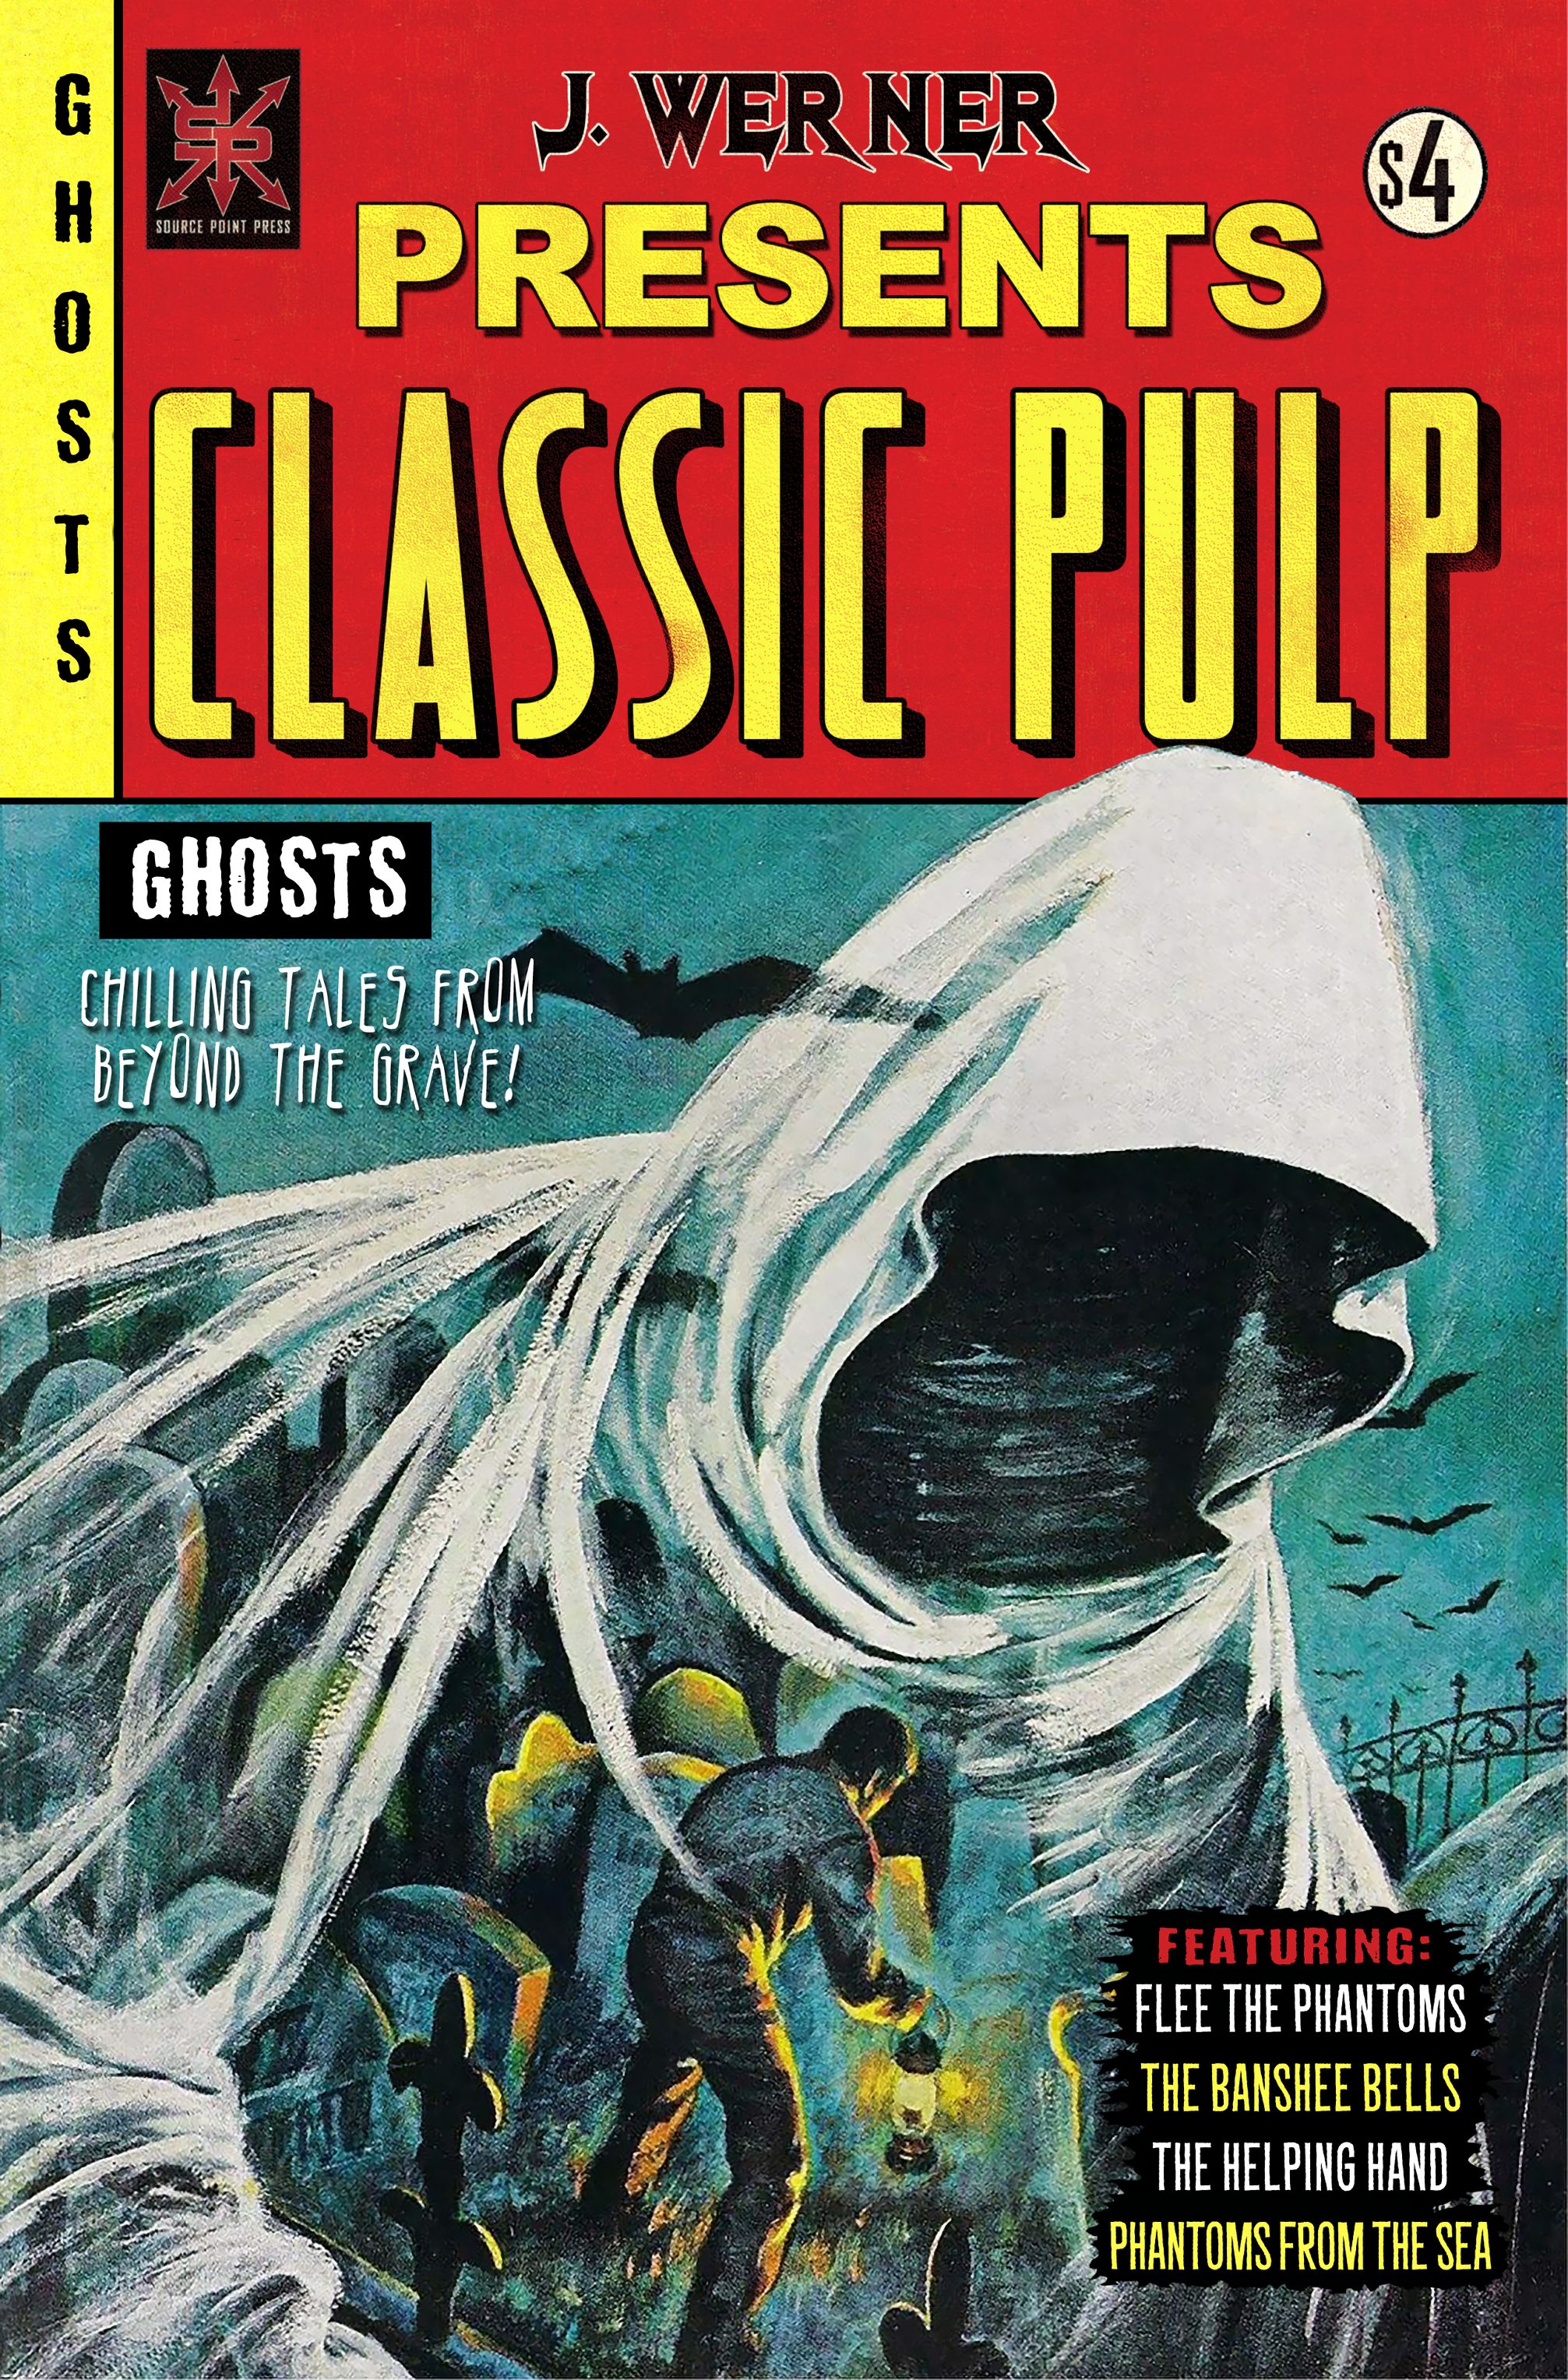 Read online J. Werner presents Classic Pulp comic -  Issue # Ghosts - 1